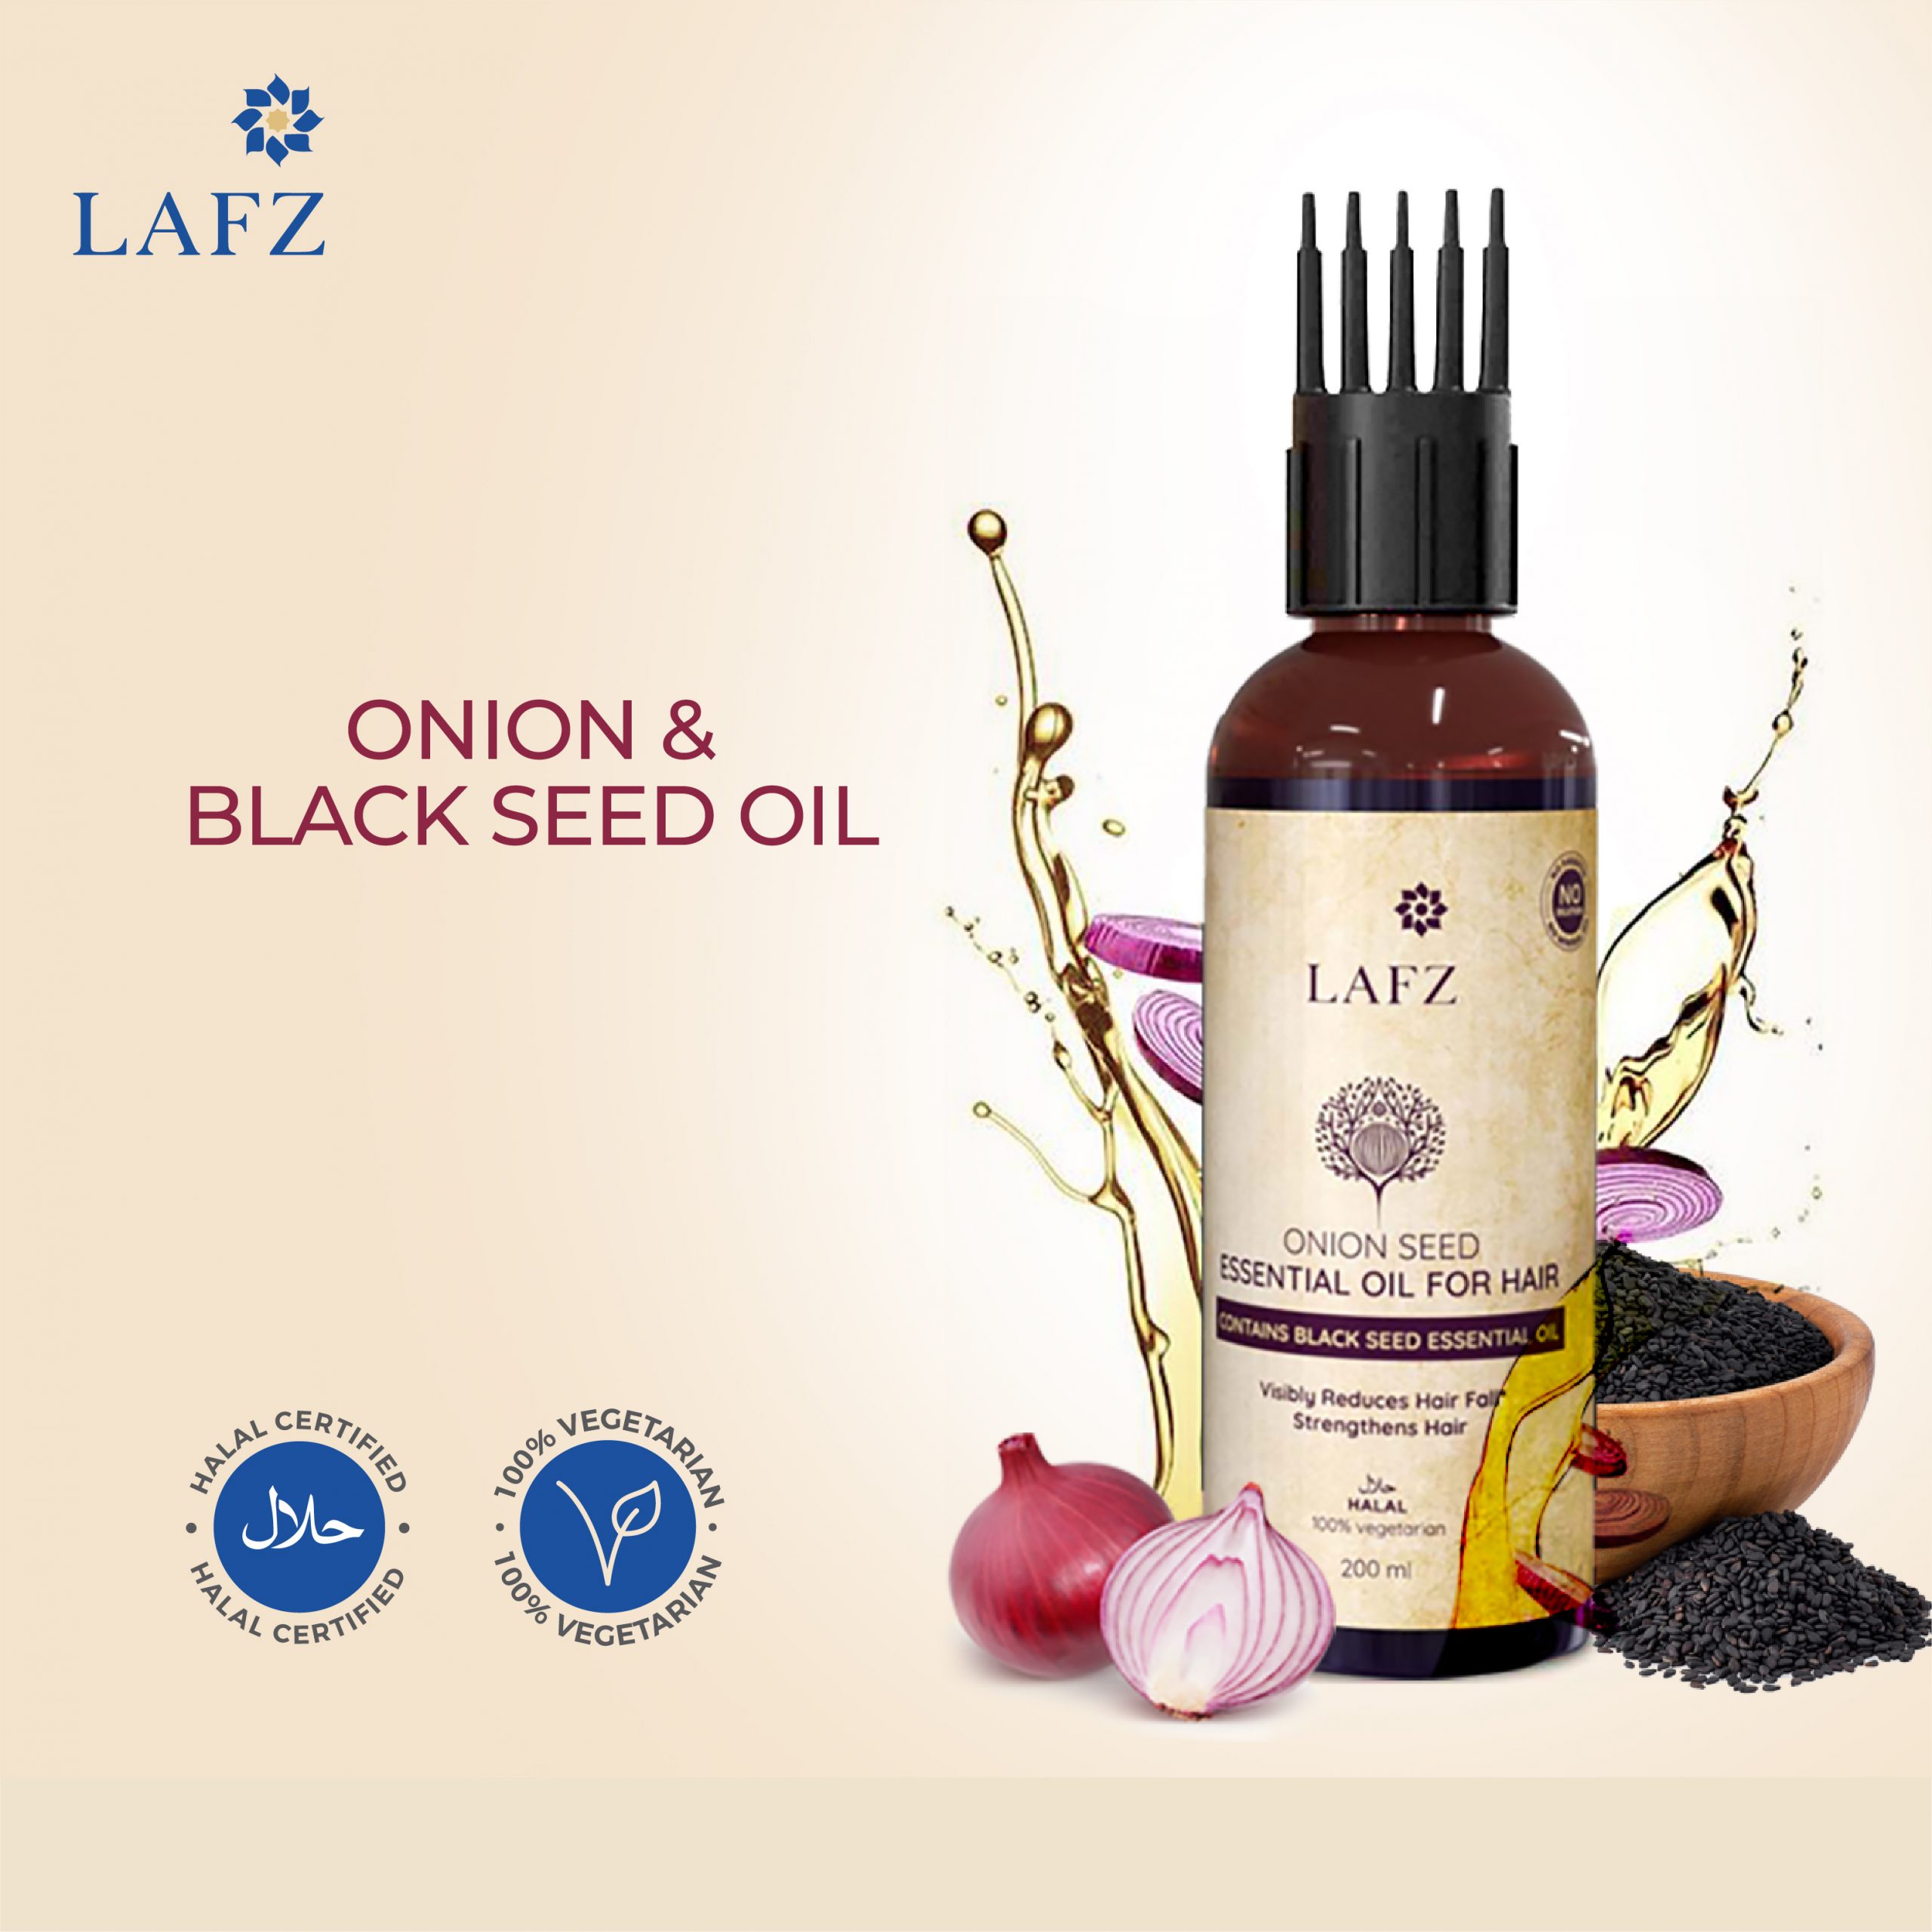 What are the Surprising Benefits and Uses of Onion Hair Oil? by Sanjeev  kumar - Issuu